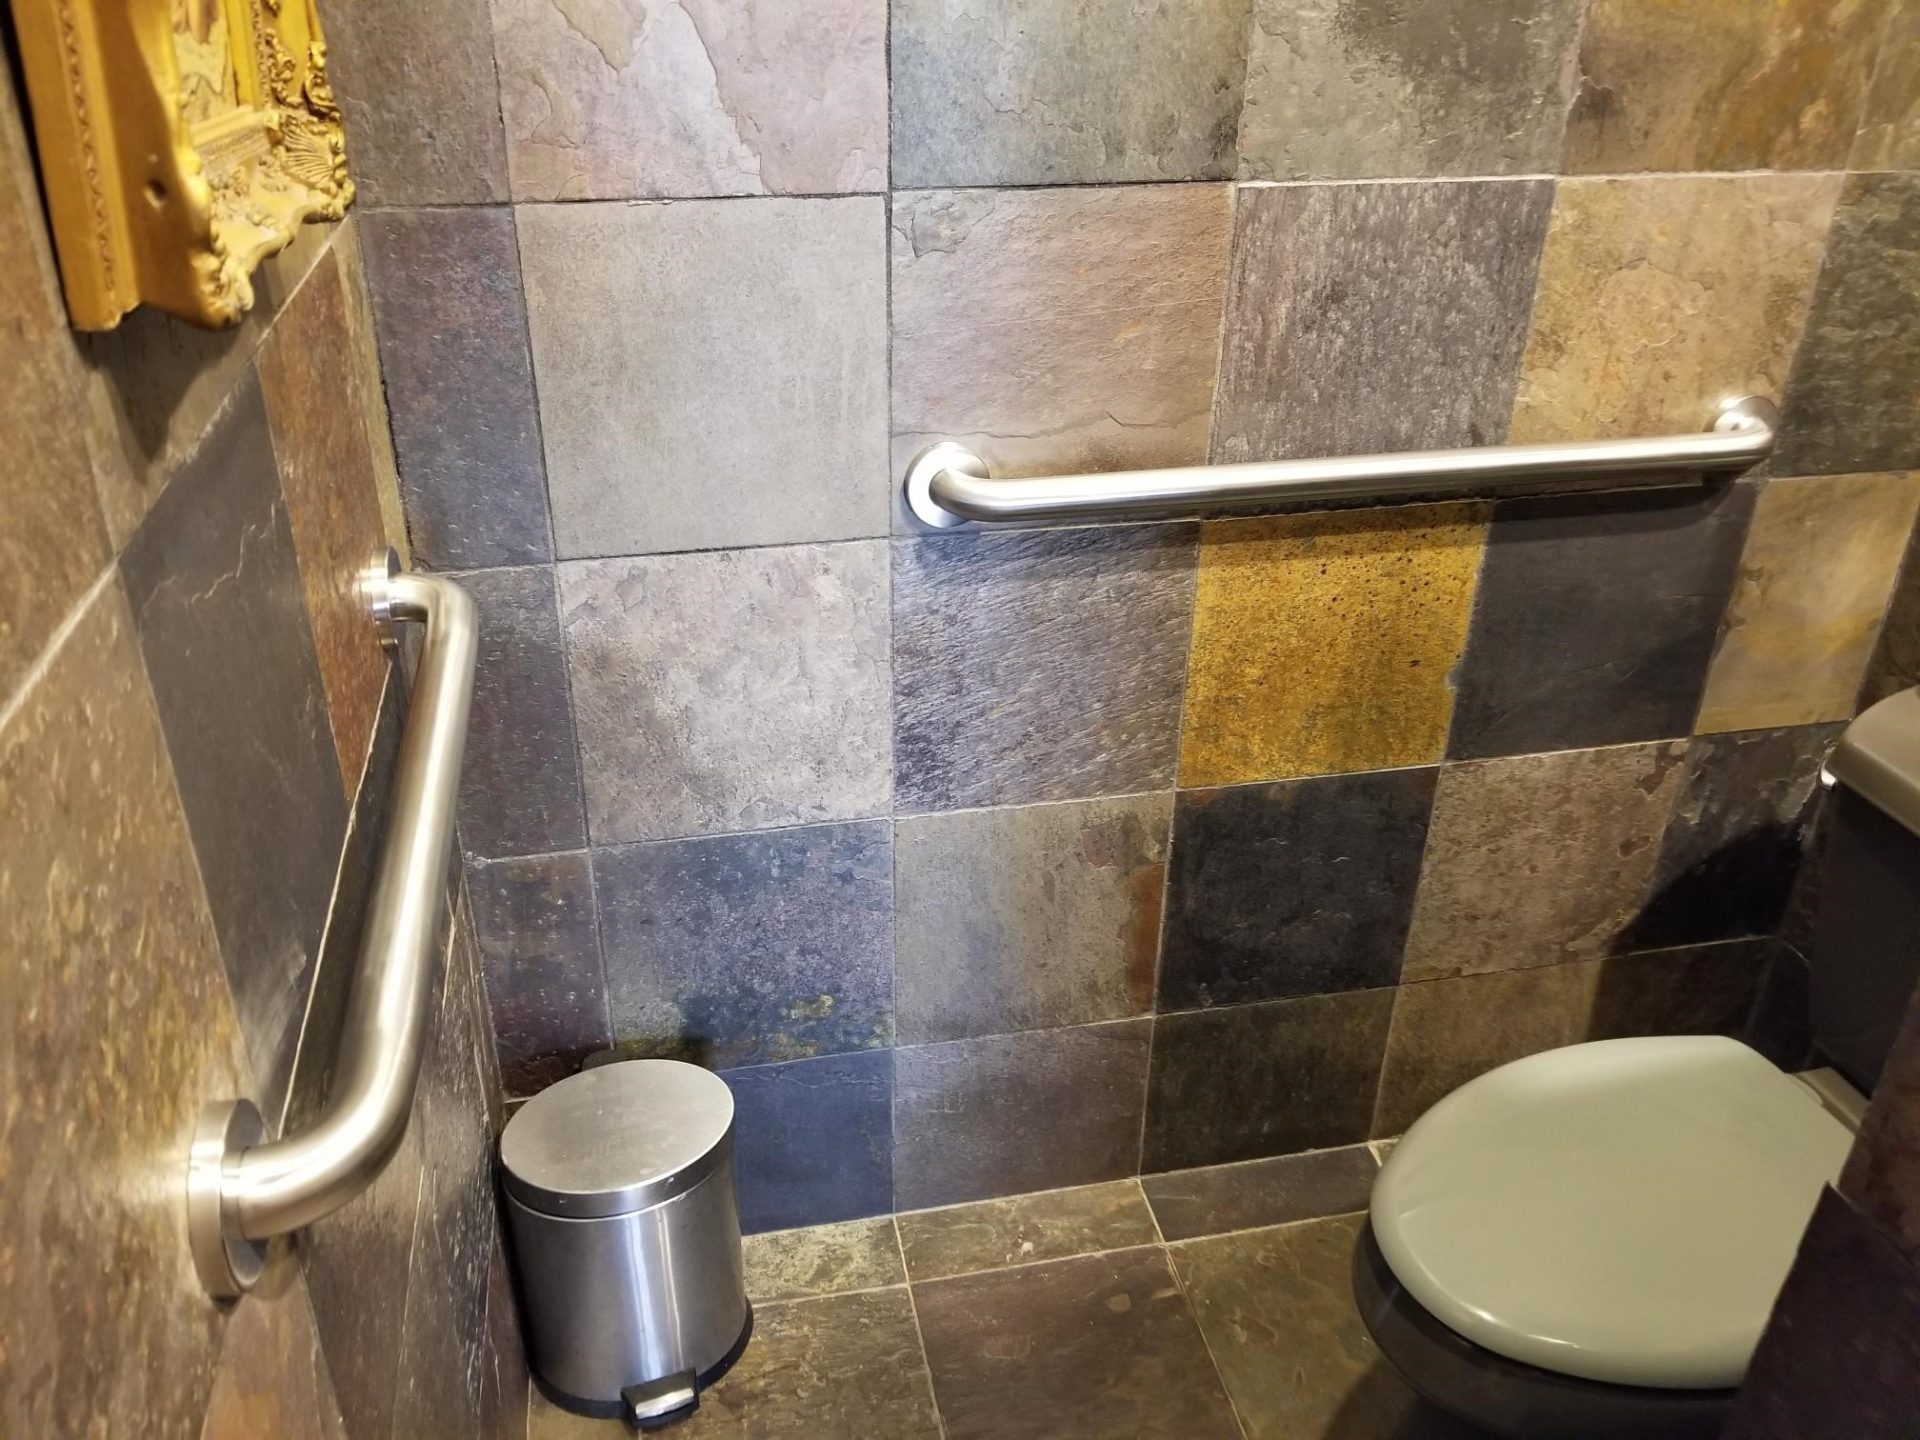 Design Solutions for the Top Bathroom Safety Hazards